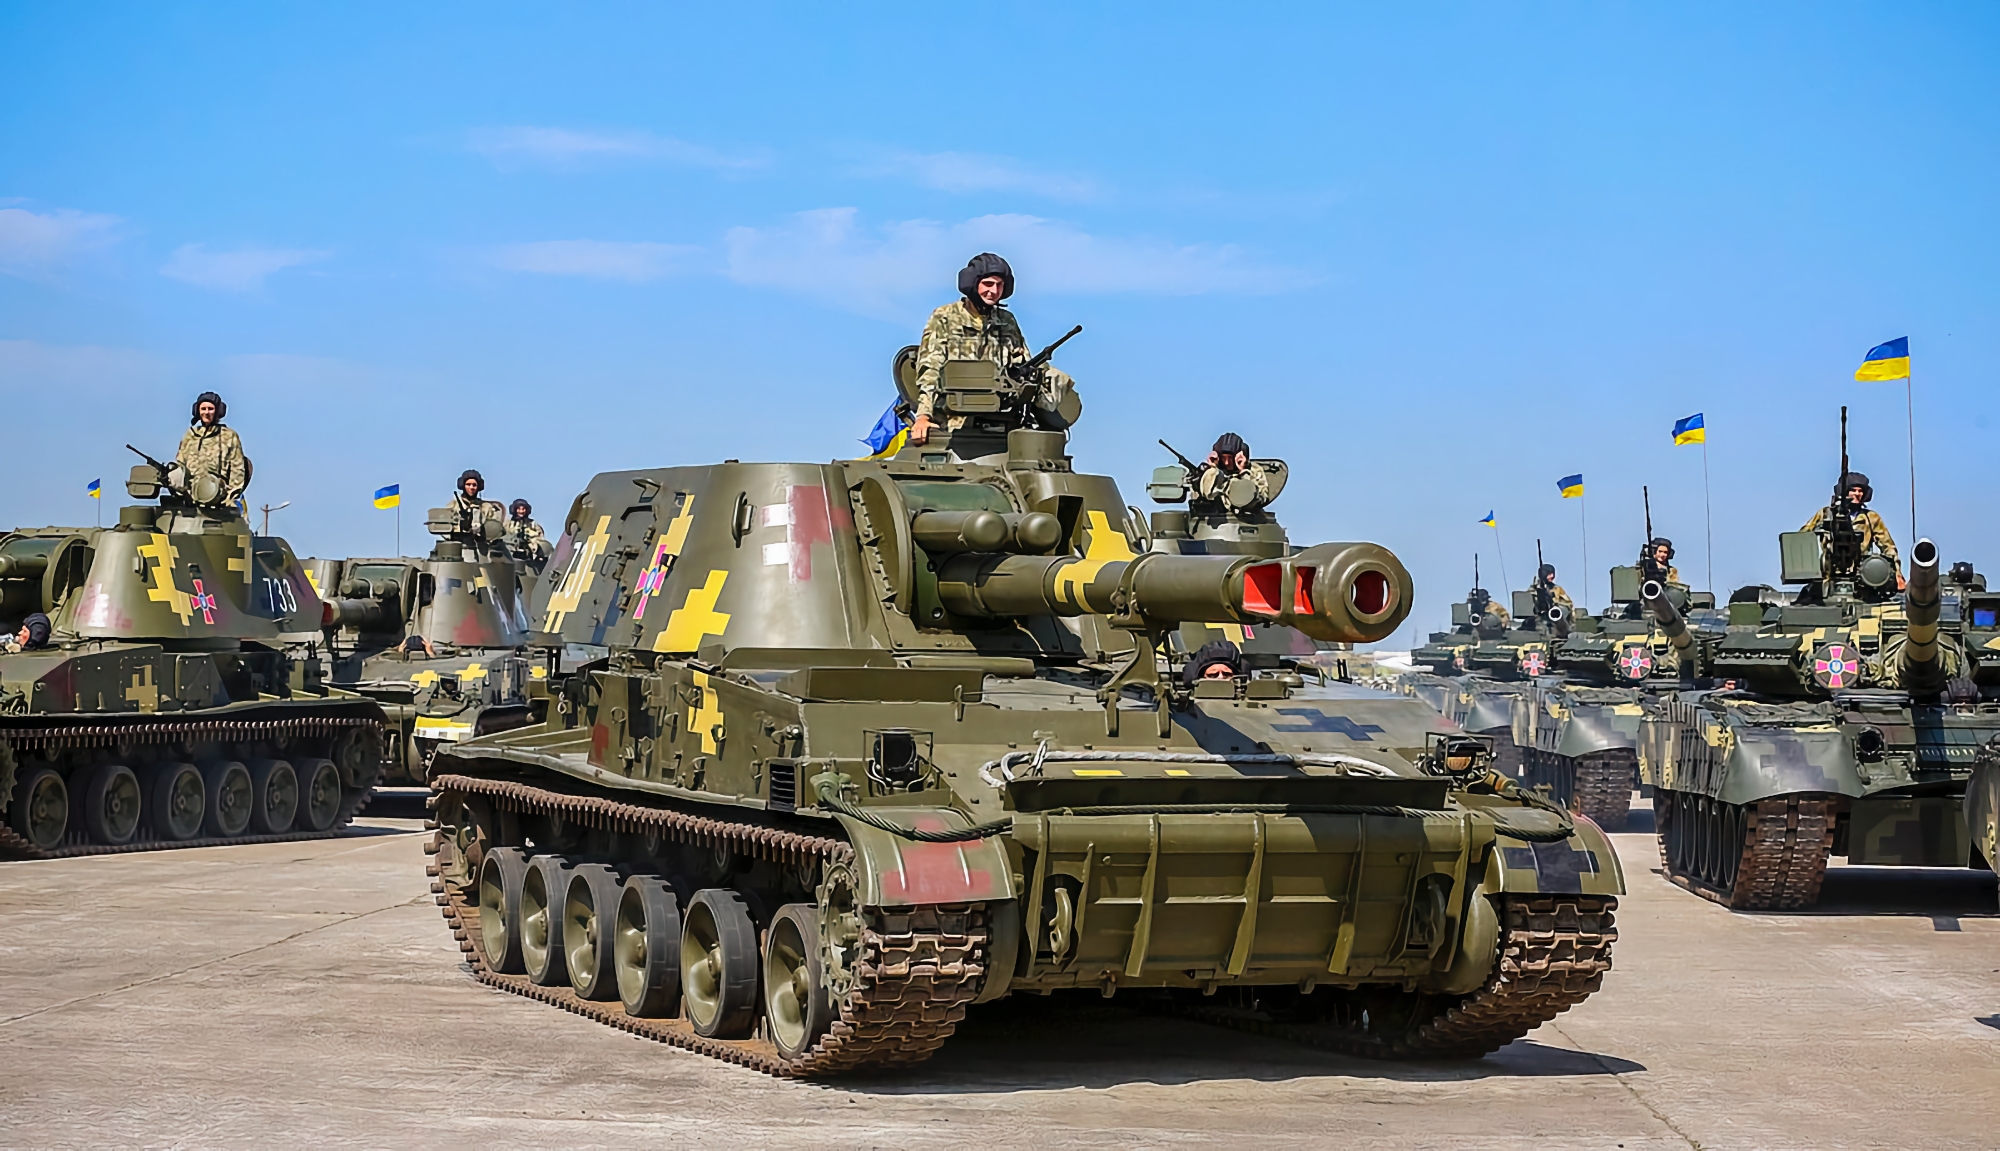 Artillerymen of the Ukrainian Armed Forces showed how they use the Acacia SAU at the front